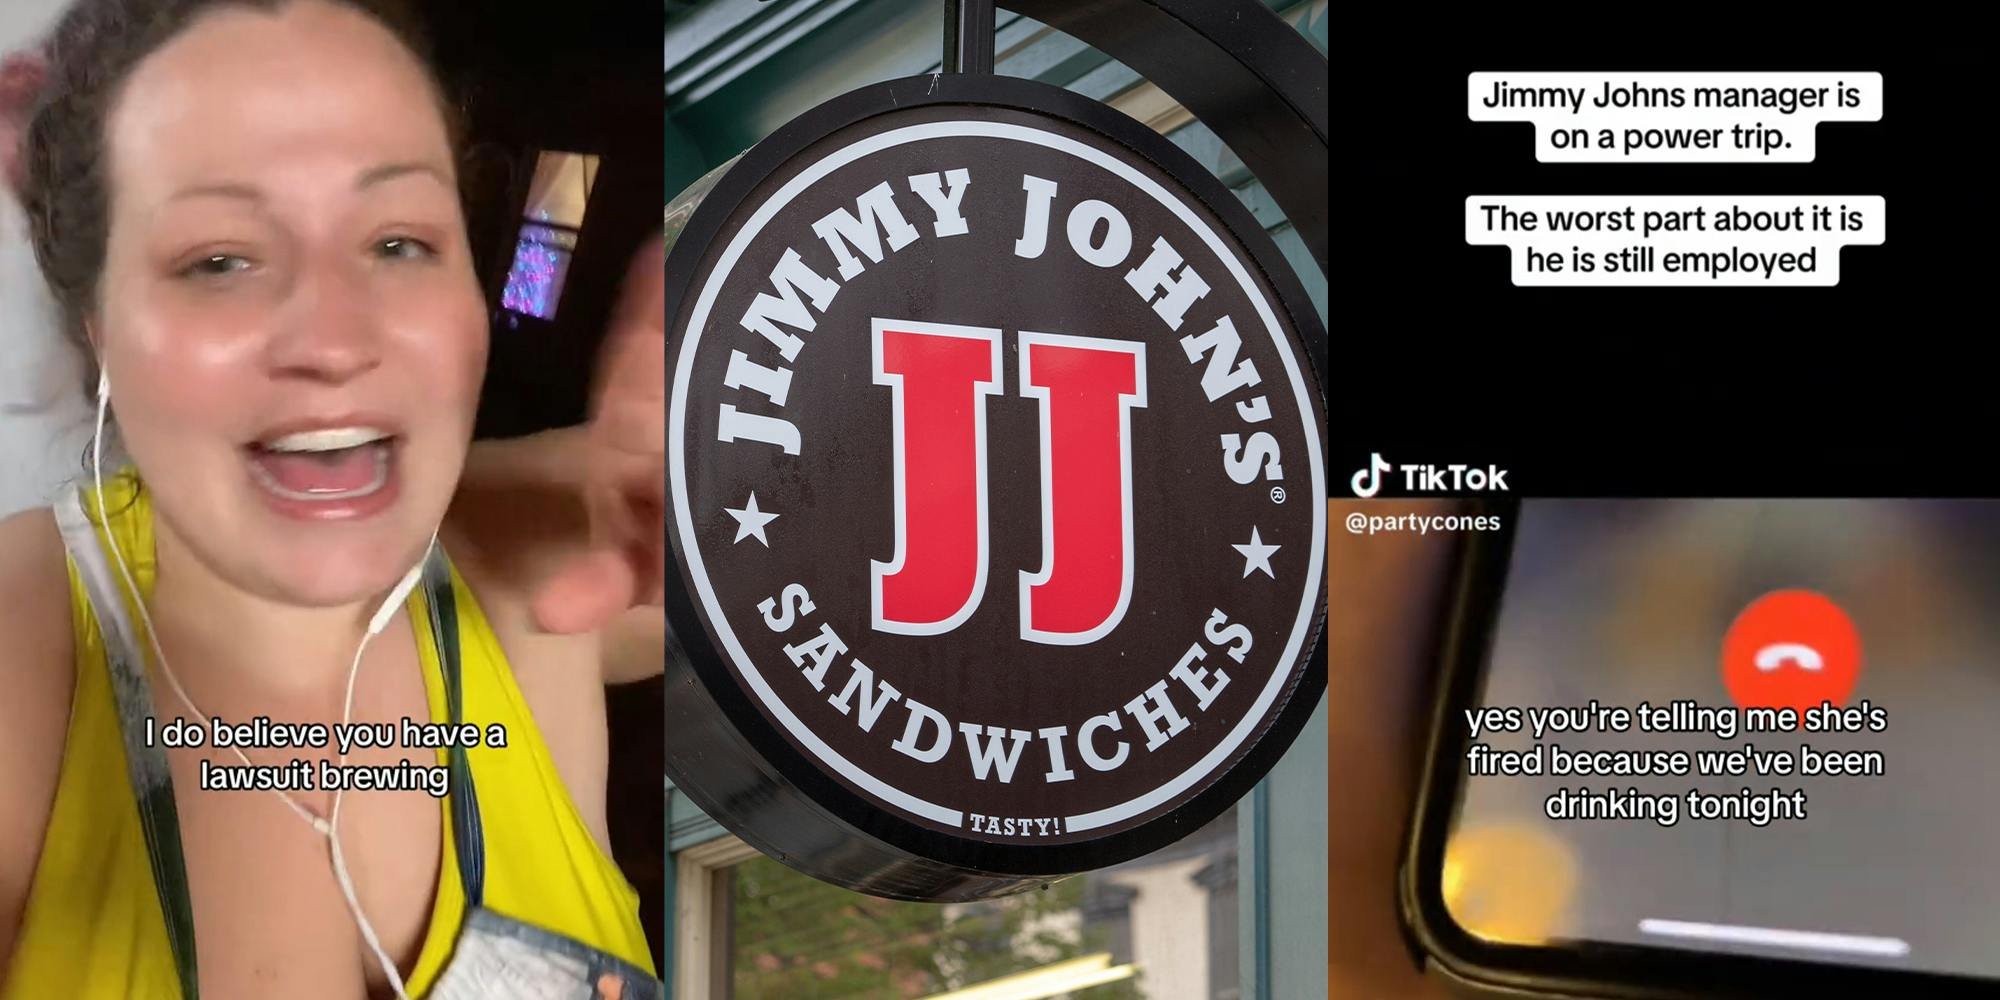 ‘I do believe you have a lawsuit brewing’: Jimmy John’s Manager Asks Worker To Unlock Store After hours, Fires Her When She Says No